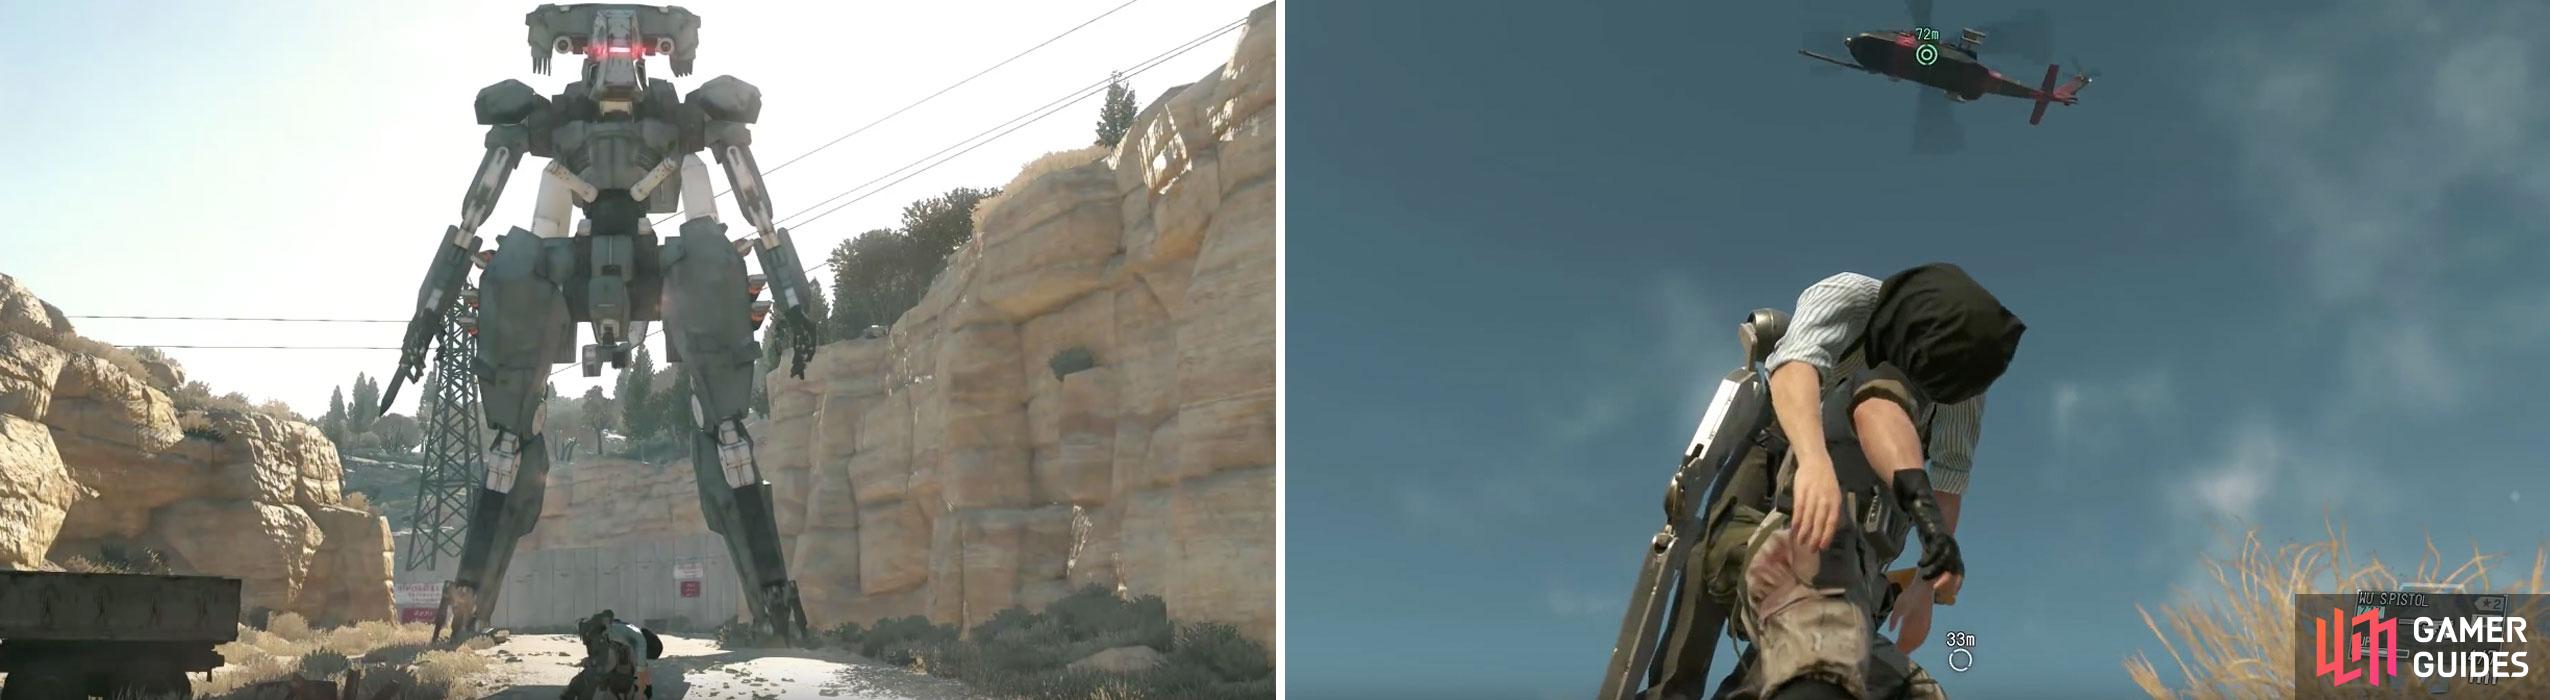 Sahelanthropus makes it’s debut (left) so it’s a good idea to sprint to the extraction point (right).